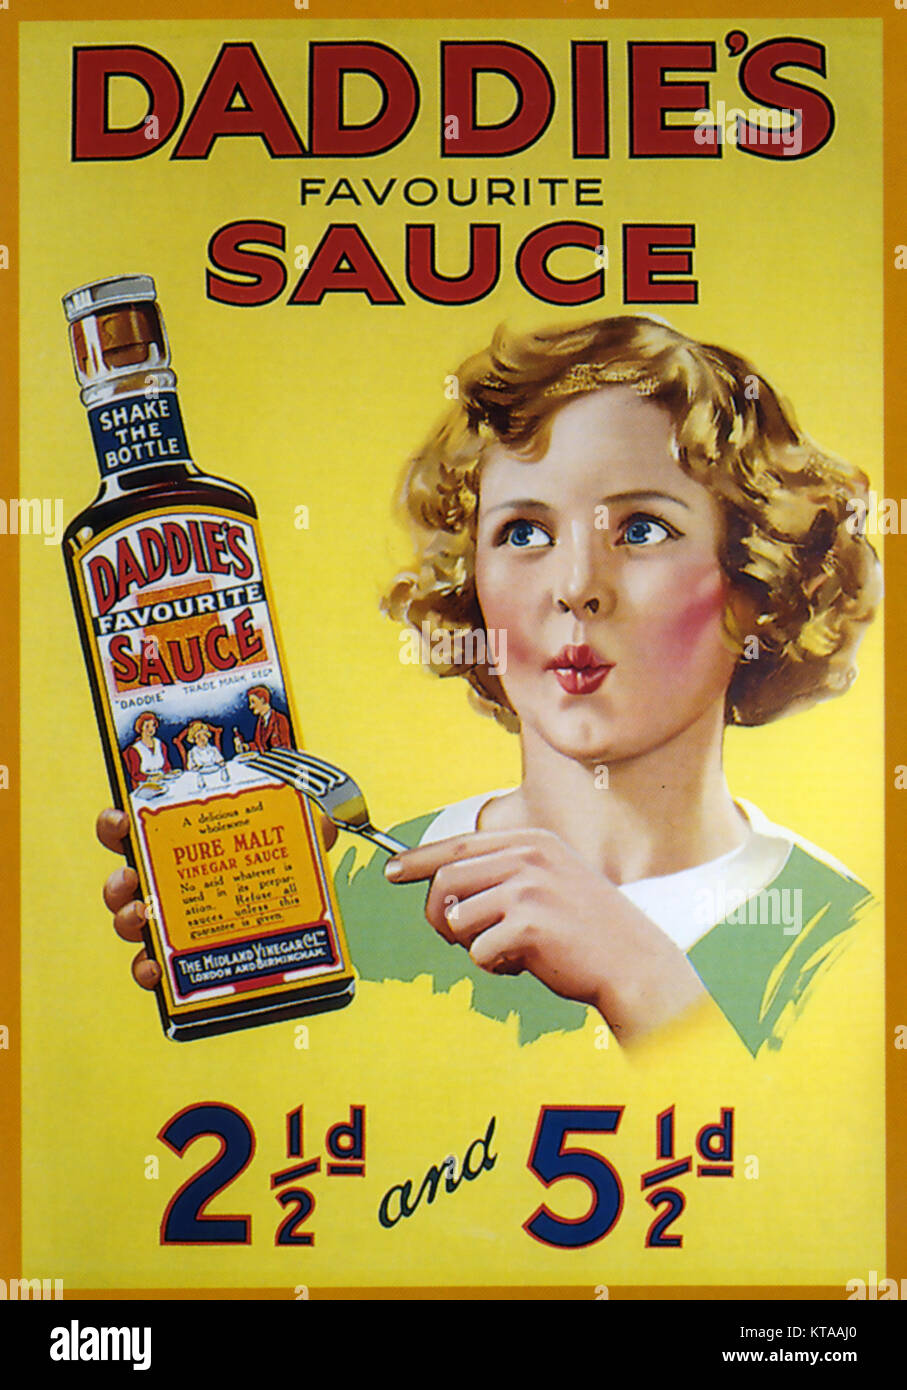 DADDIE'S SAUCE advert about 1930 Stock Photo